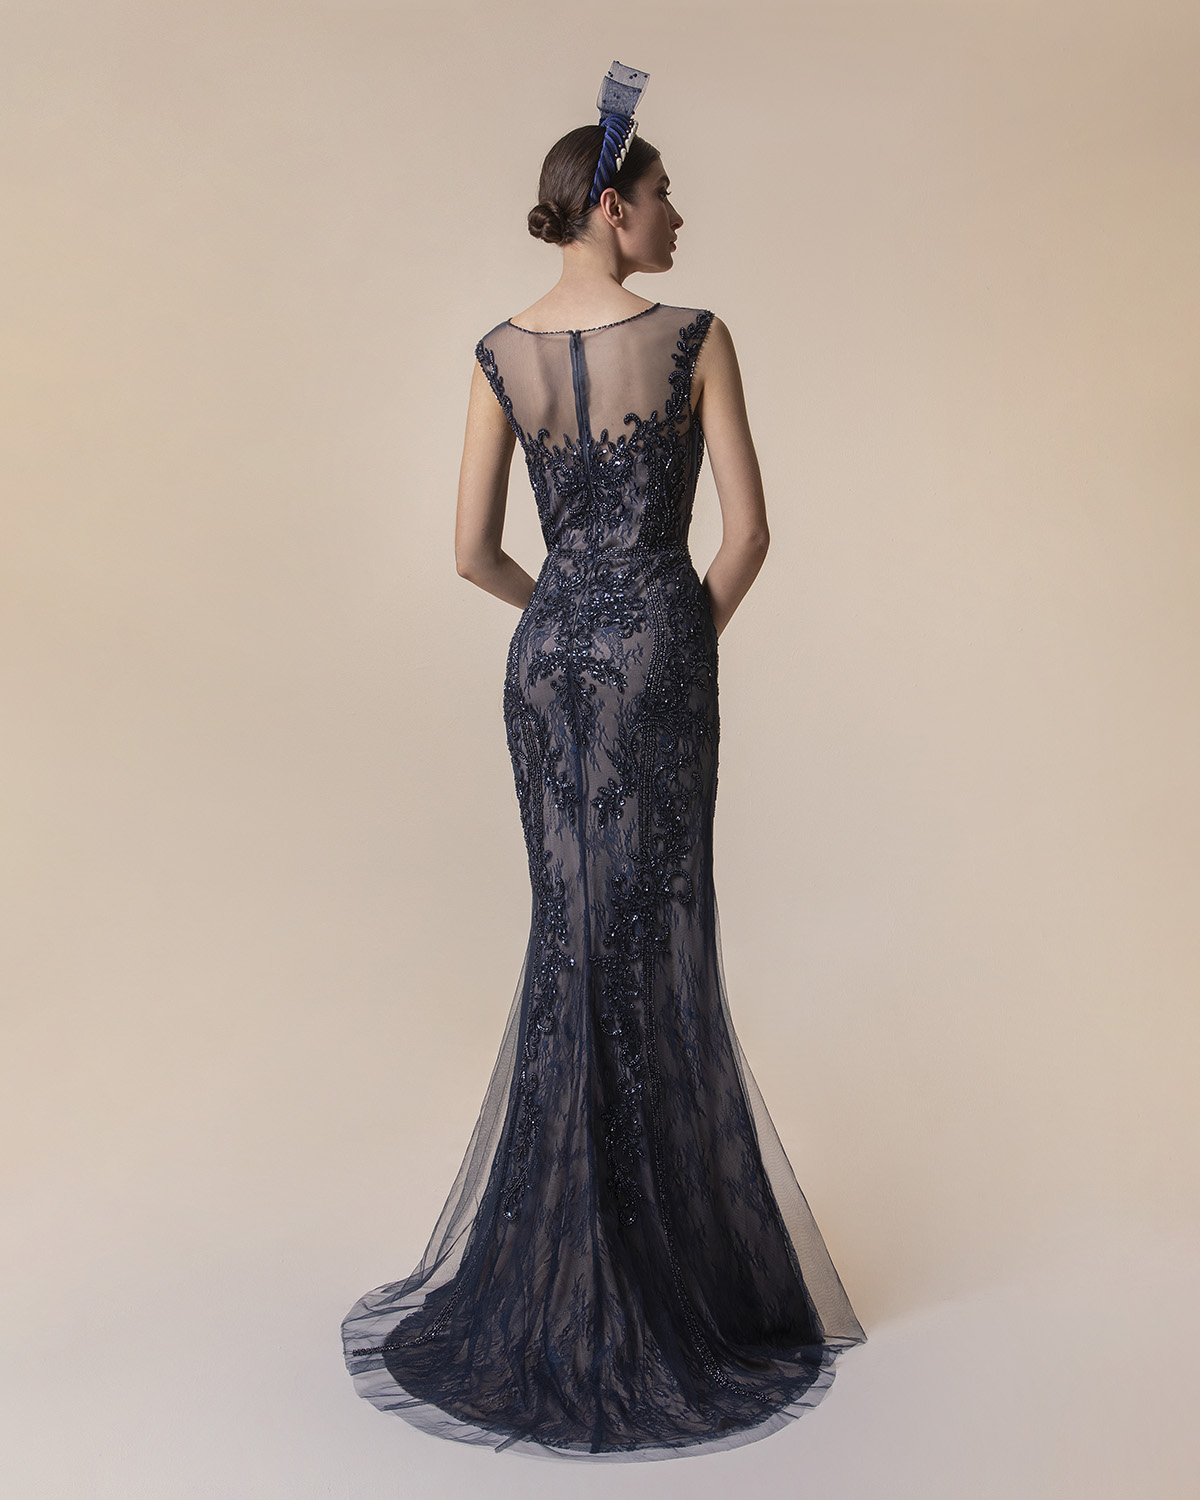 Evening Dresses / Long evening tulle fully beaded dress with lace